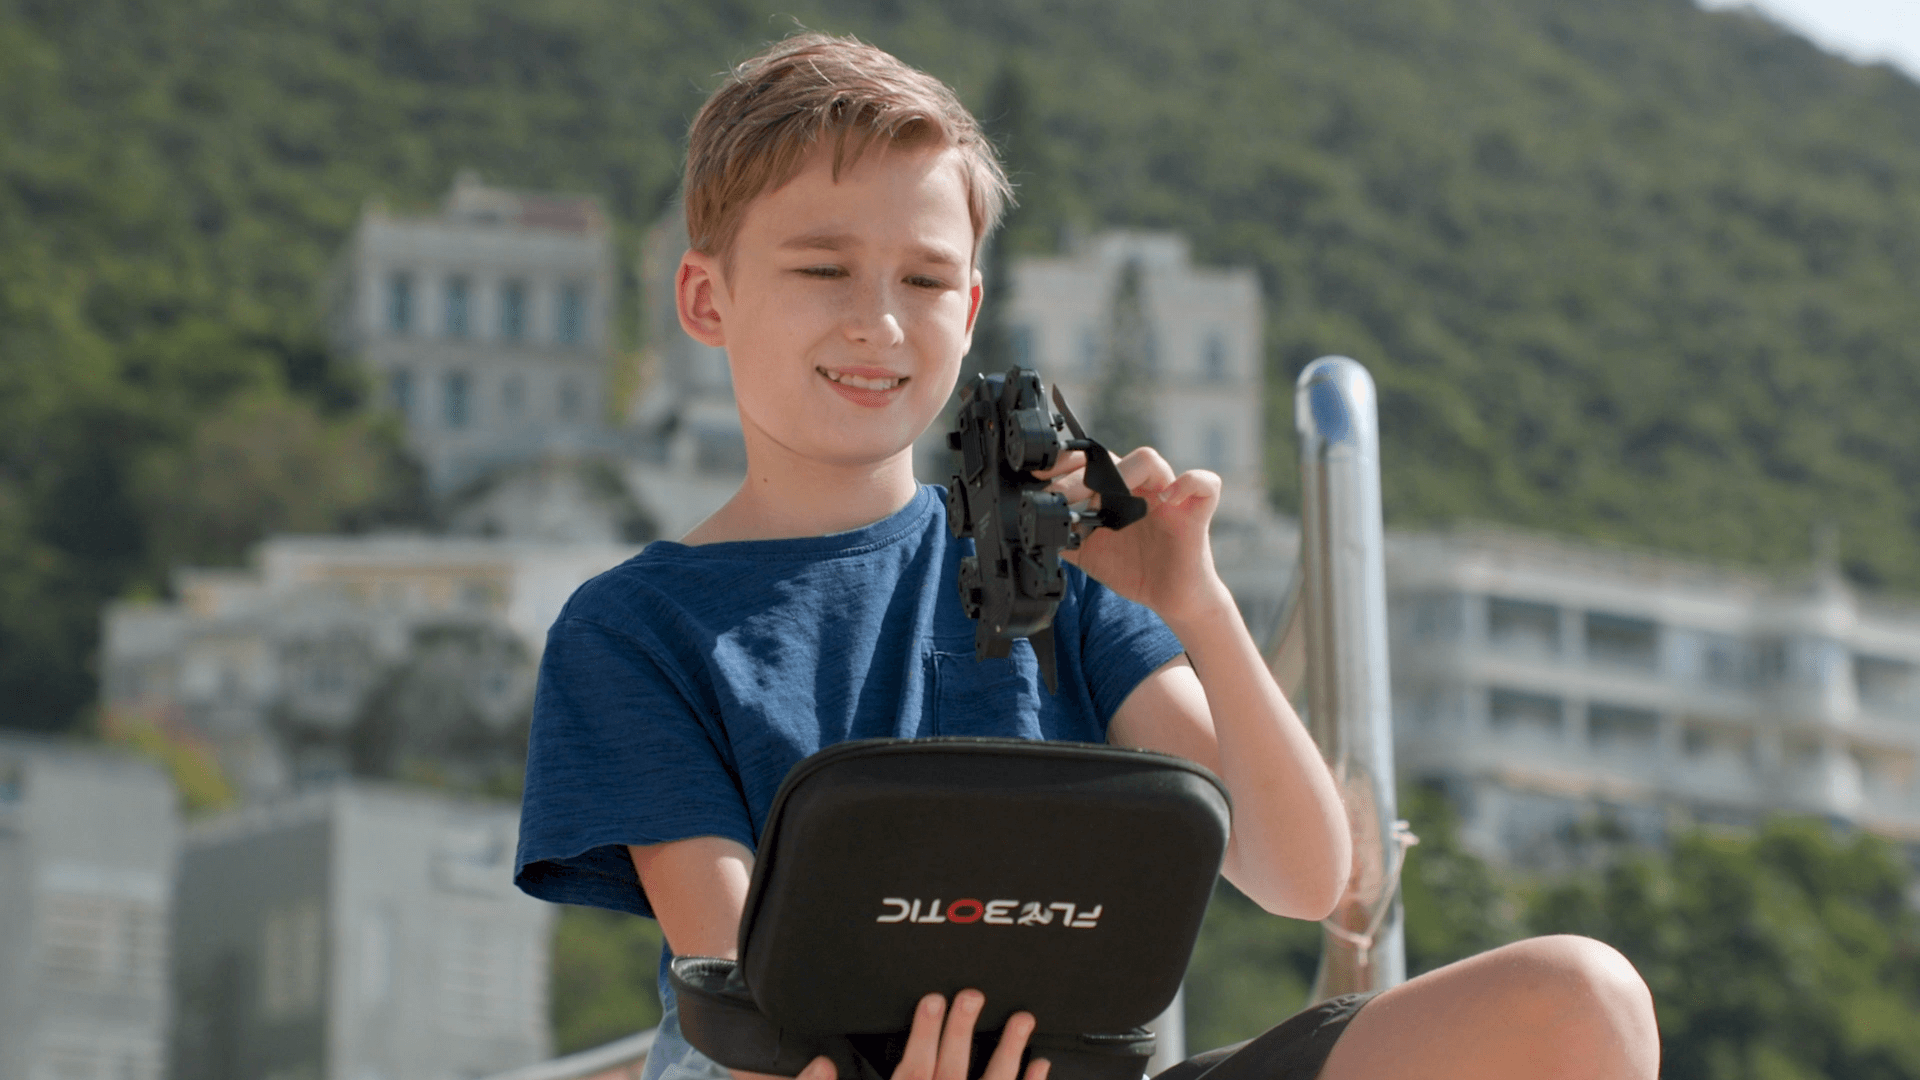 Foldable Drone avec caméra flybotic neuf - Flybotic